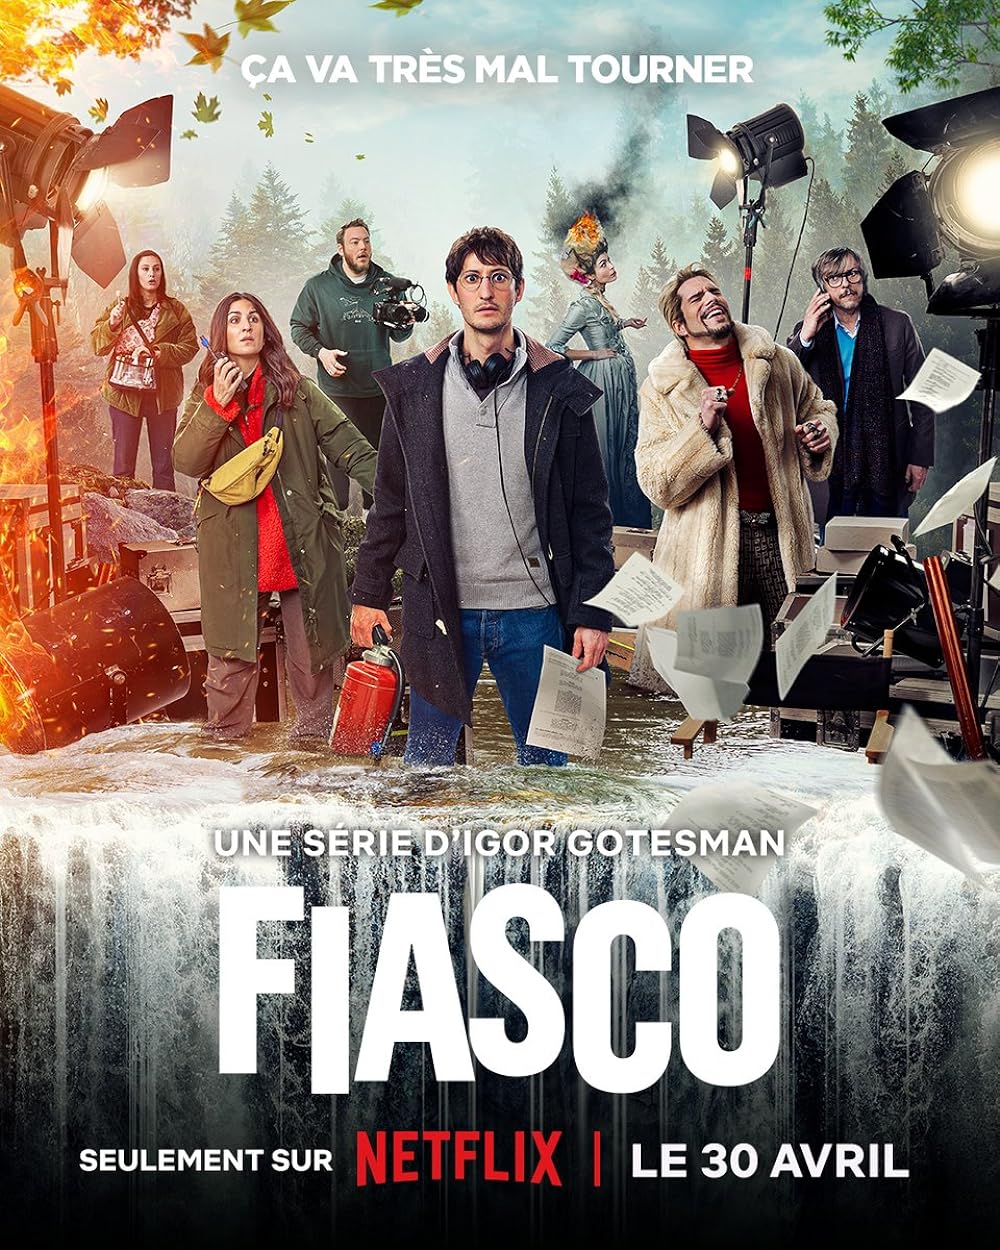 Fiasco (Streaming on Netflix) - April 30Embark on a journey into the tumultuous realm of filmmaking with 